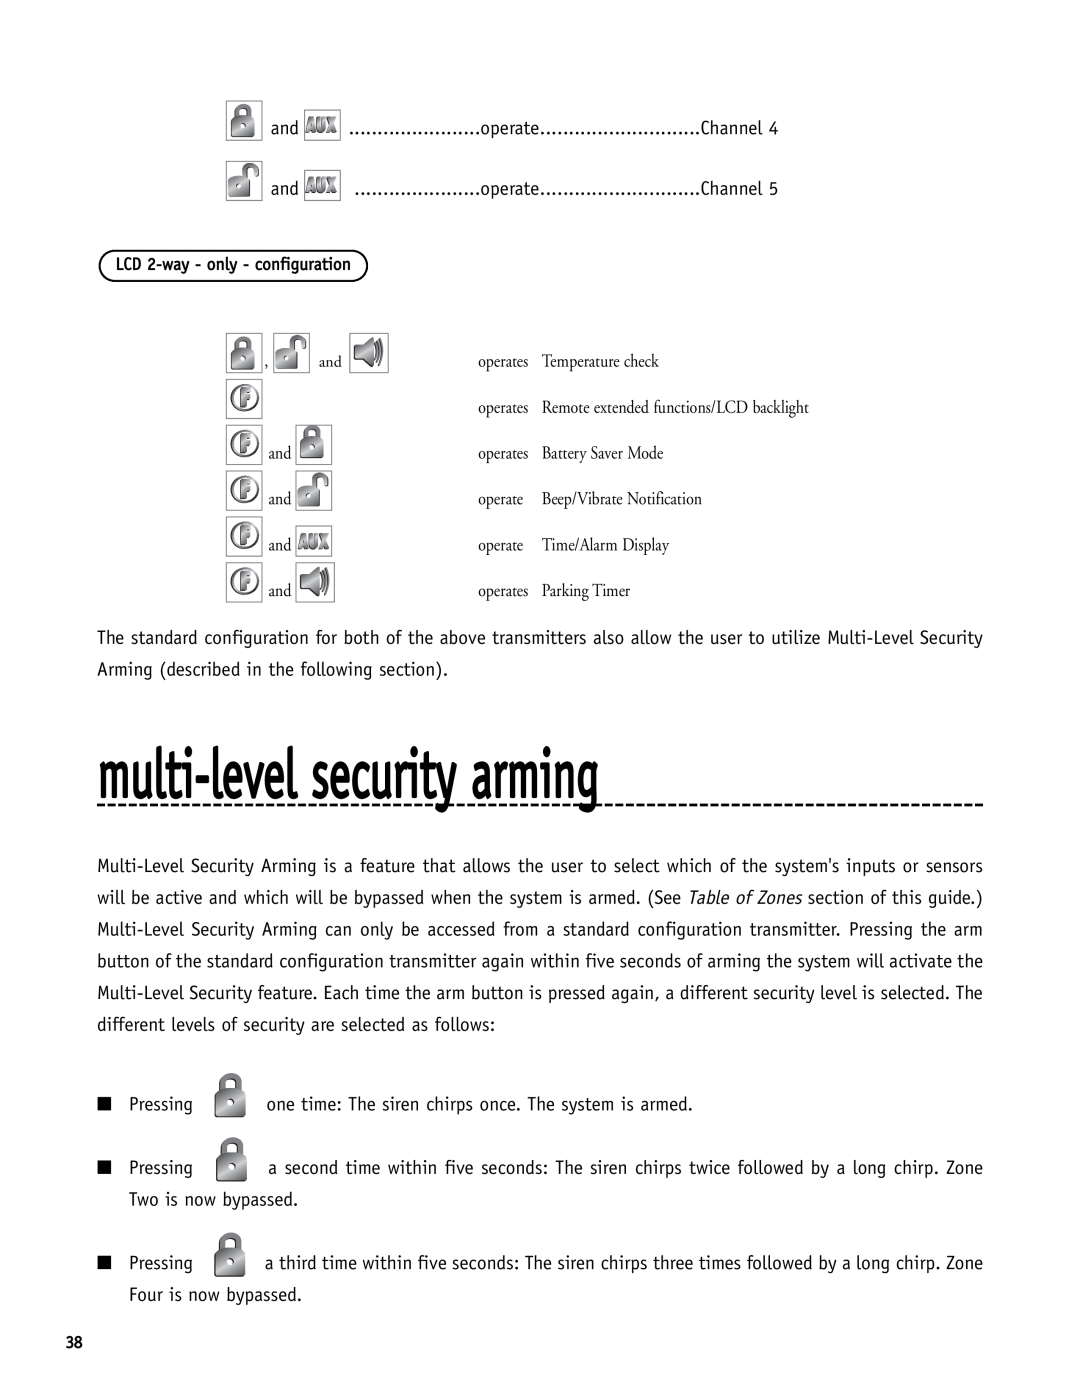 Directed Electronics SR6000 manual multi-levelsecurity arming 